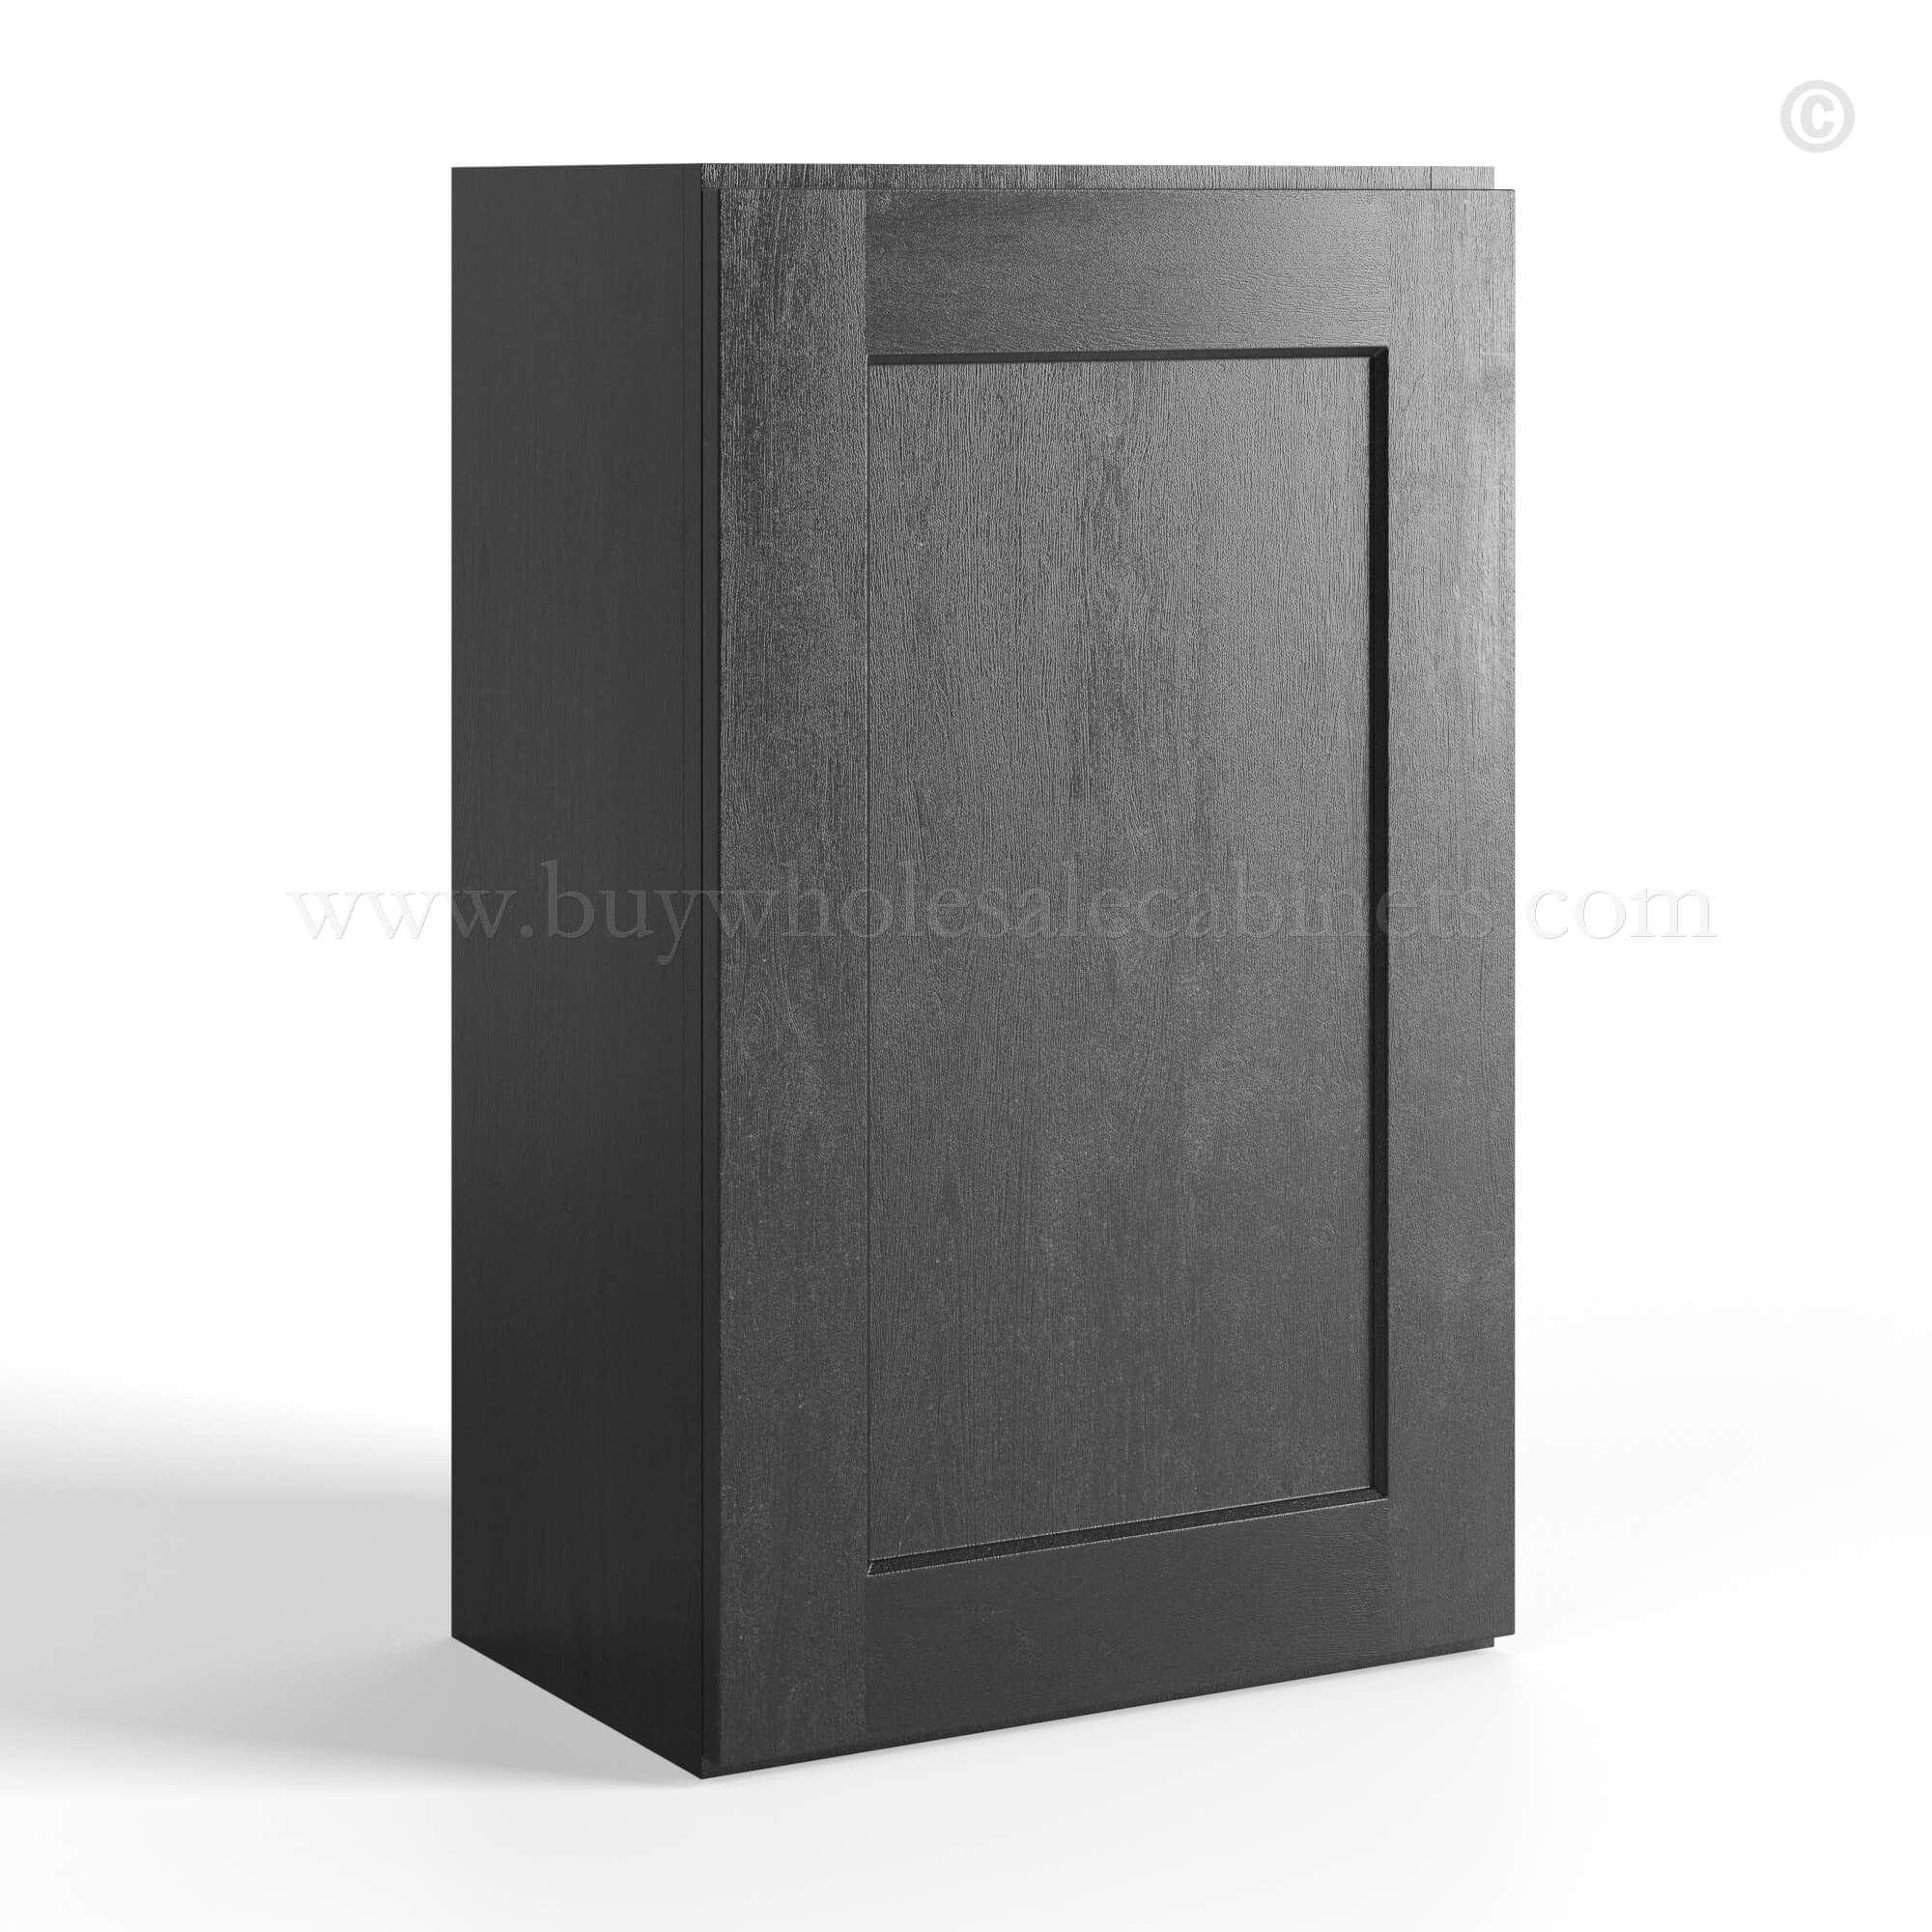 Charcoal Black Shaker Single Door Wall Cabinet 30H, rta cabinets, wholesale cabinets